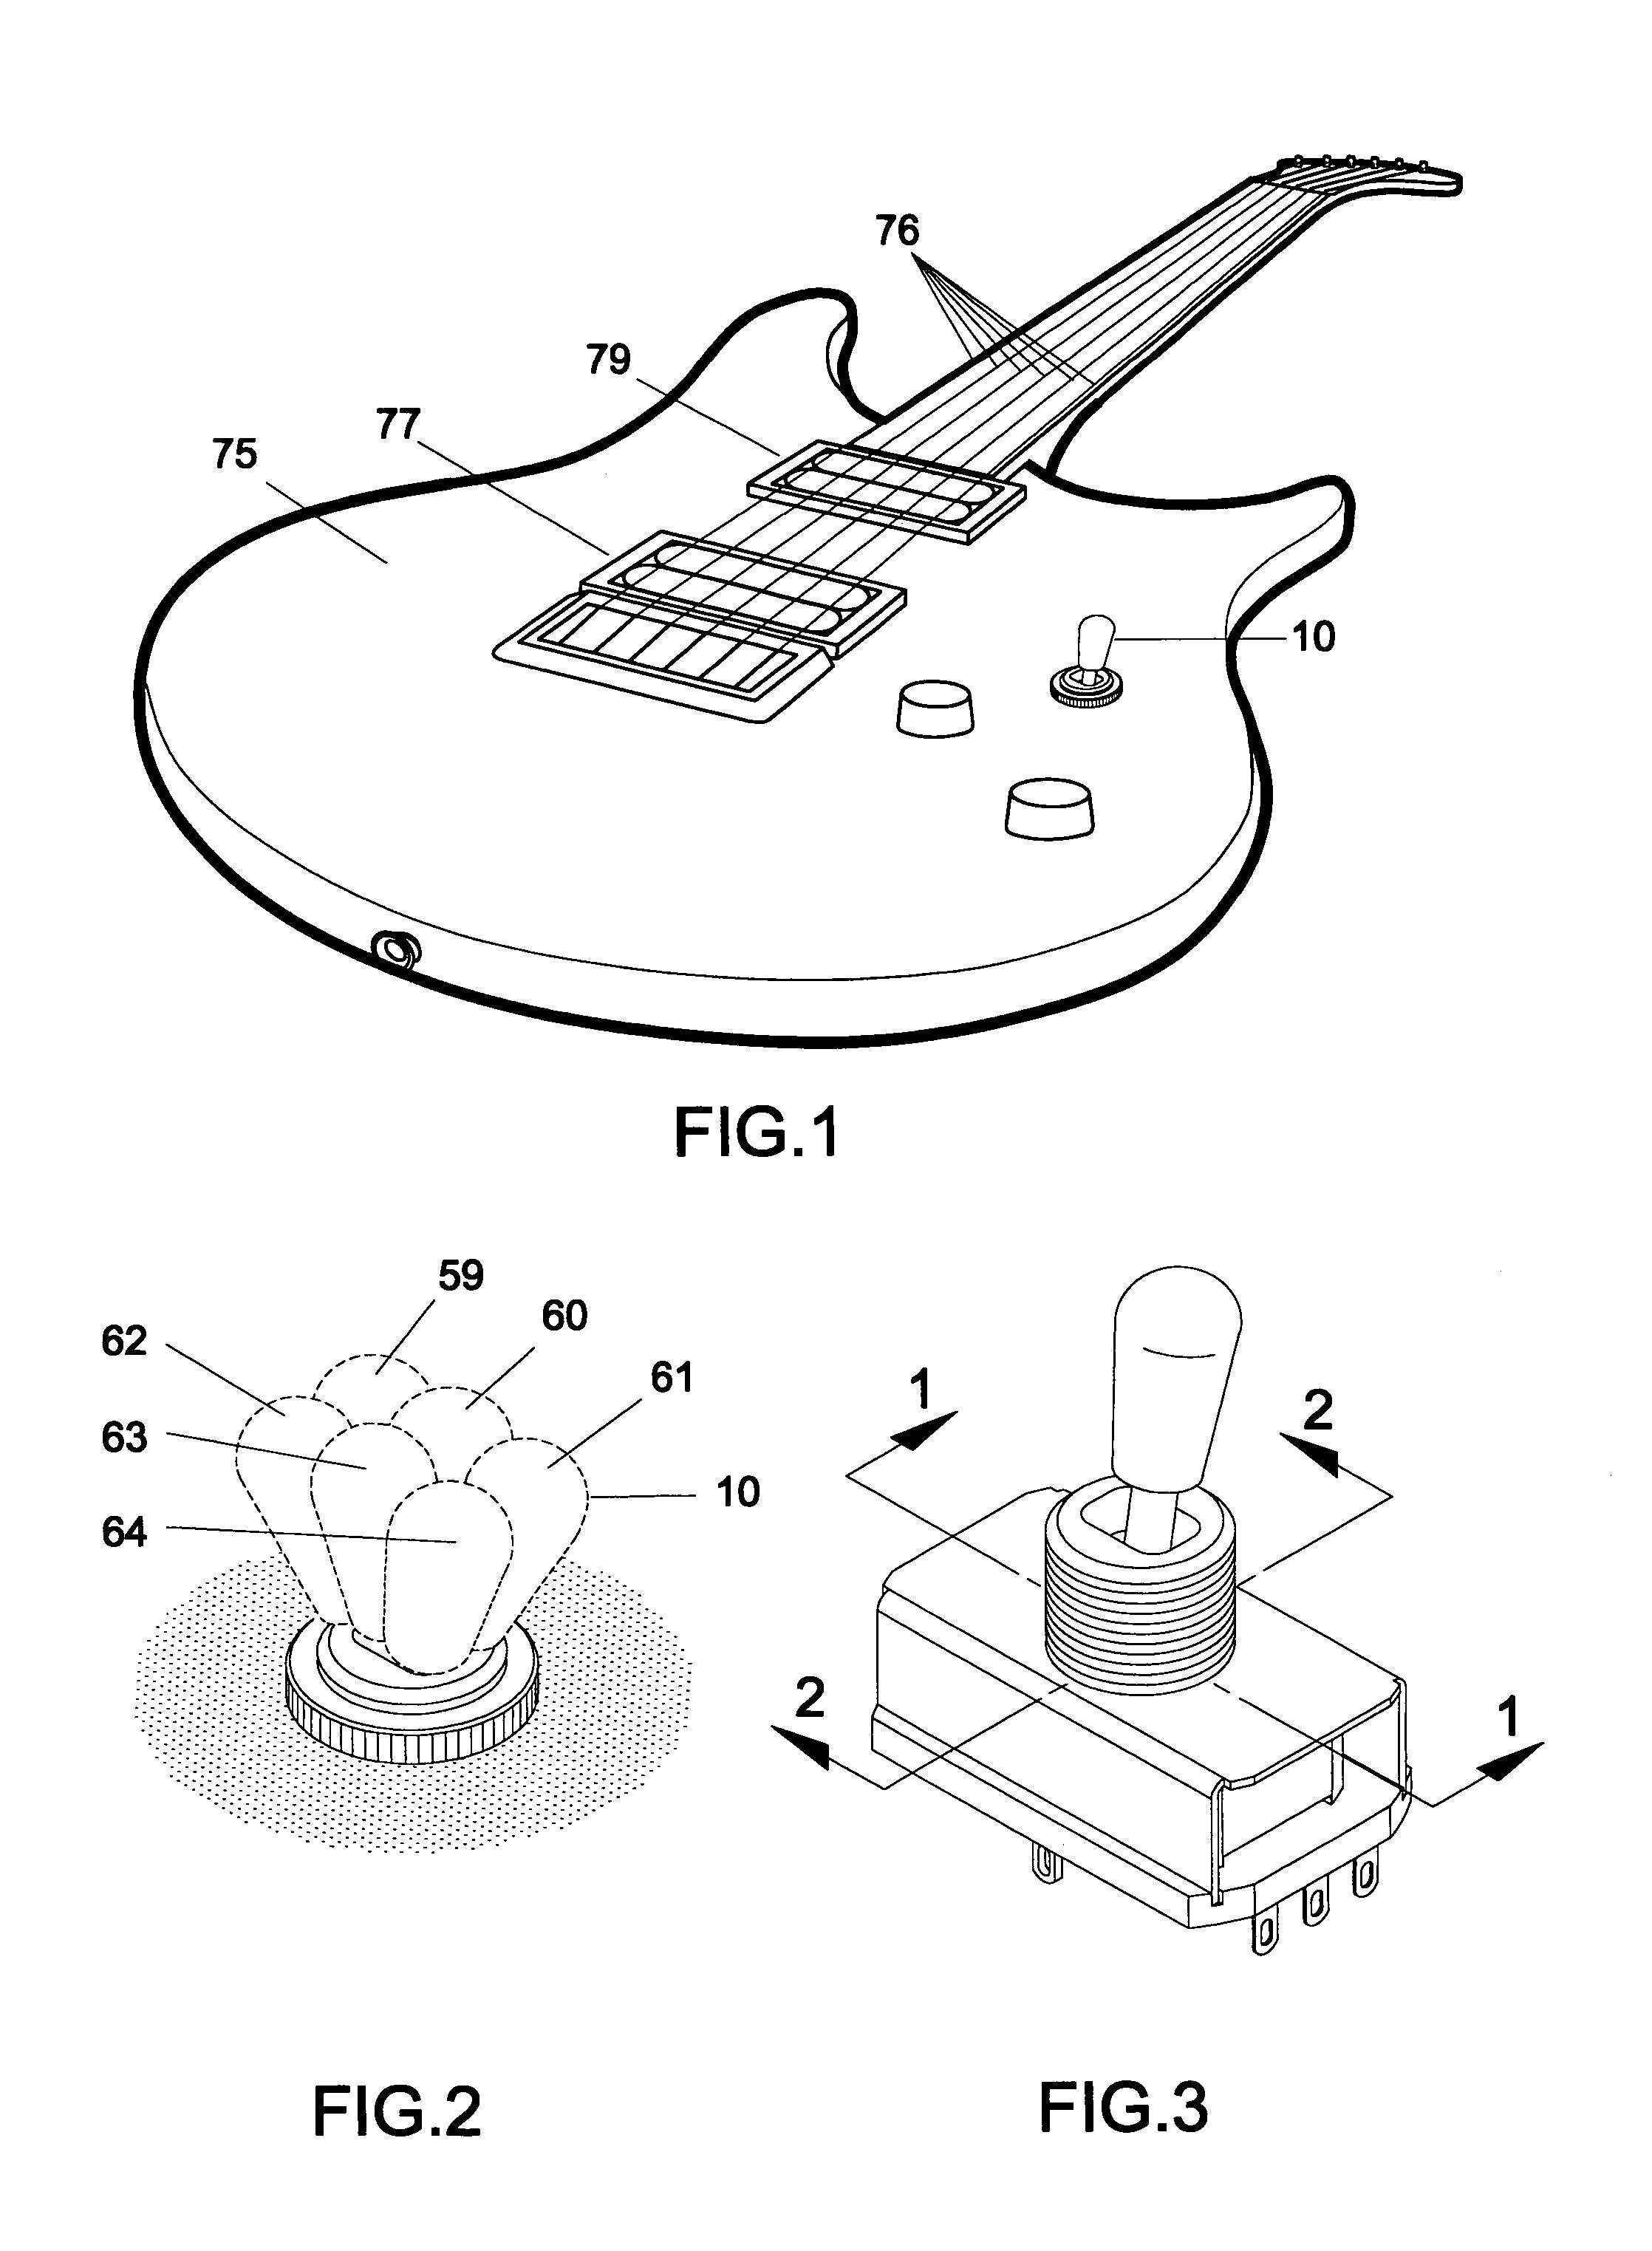 Bi-directional switch apparatus with electric guitar applications